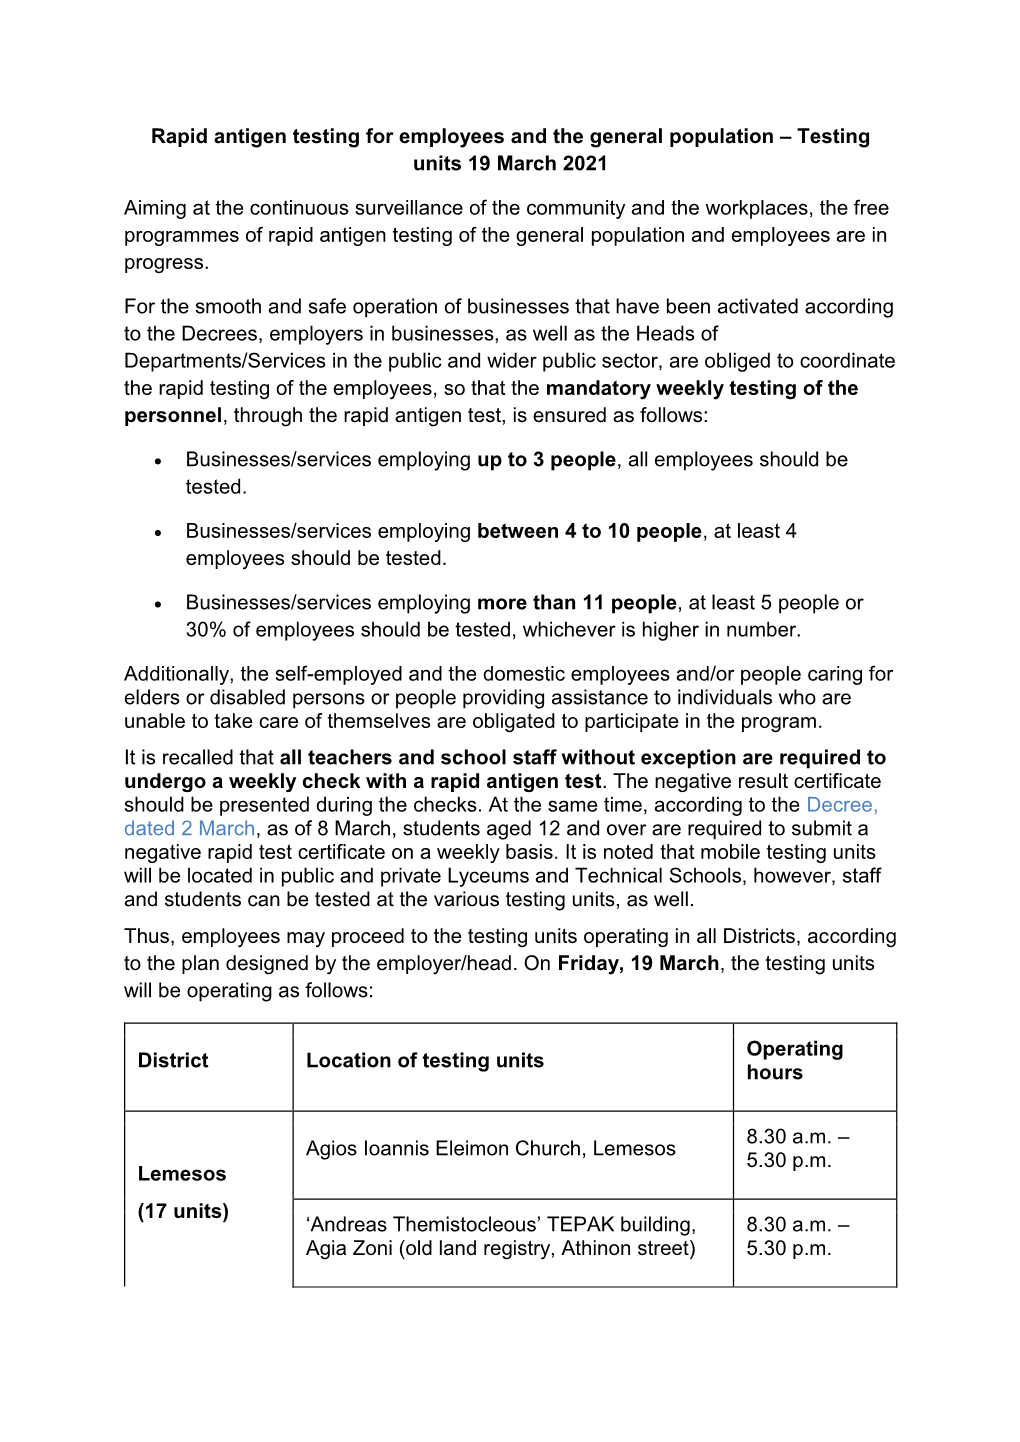 Rapid Antigen Testing for Employees and the General Population – Testing Units 19 March 2021 Aiming at the Continuous Surveill